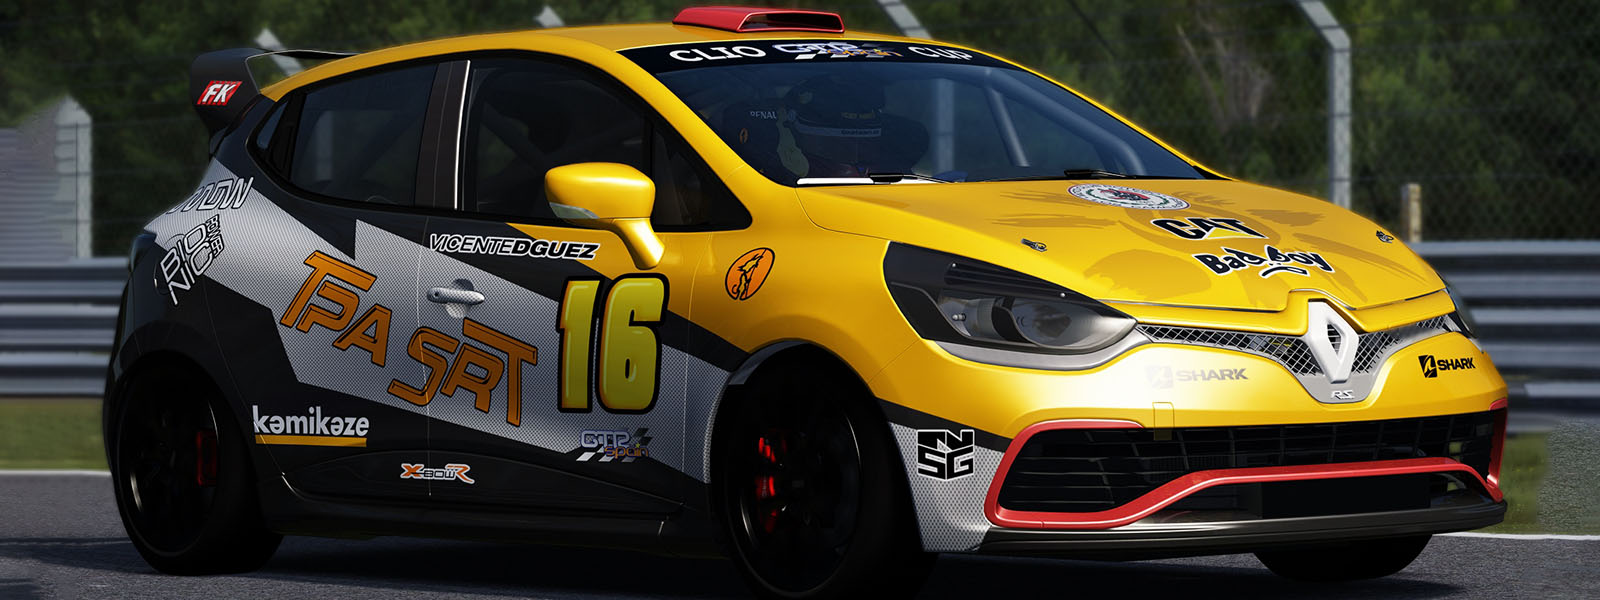 vicentecliocup1